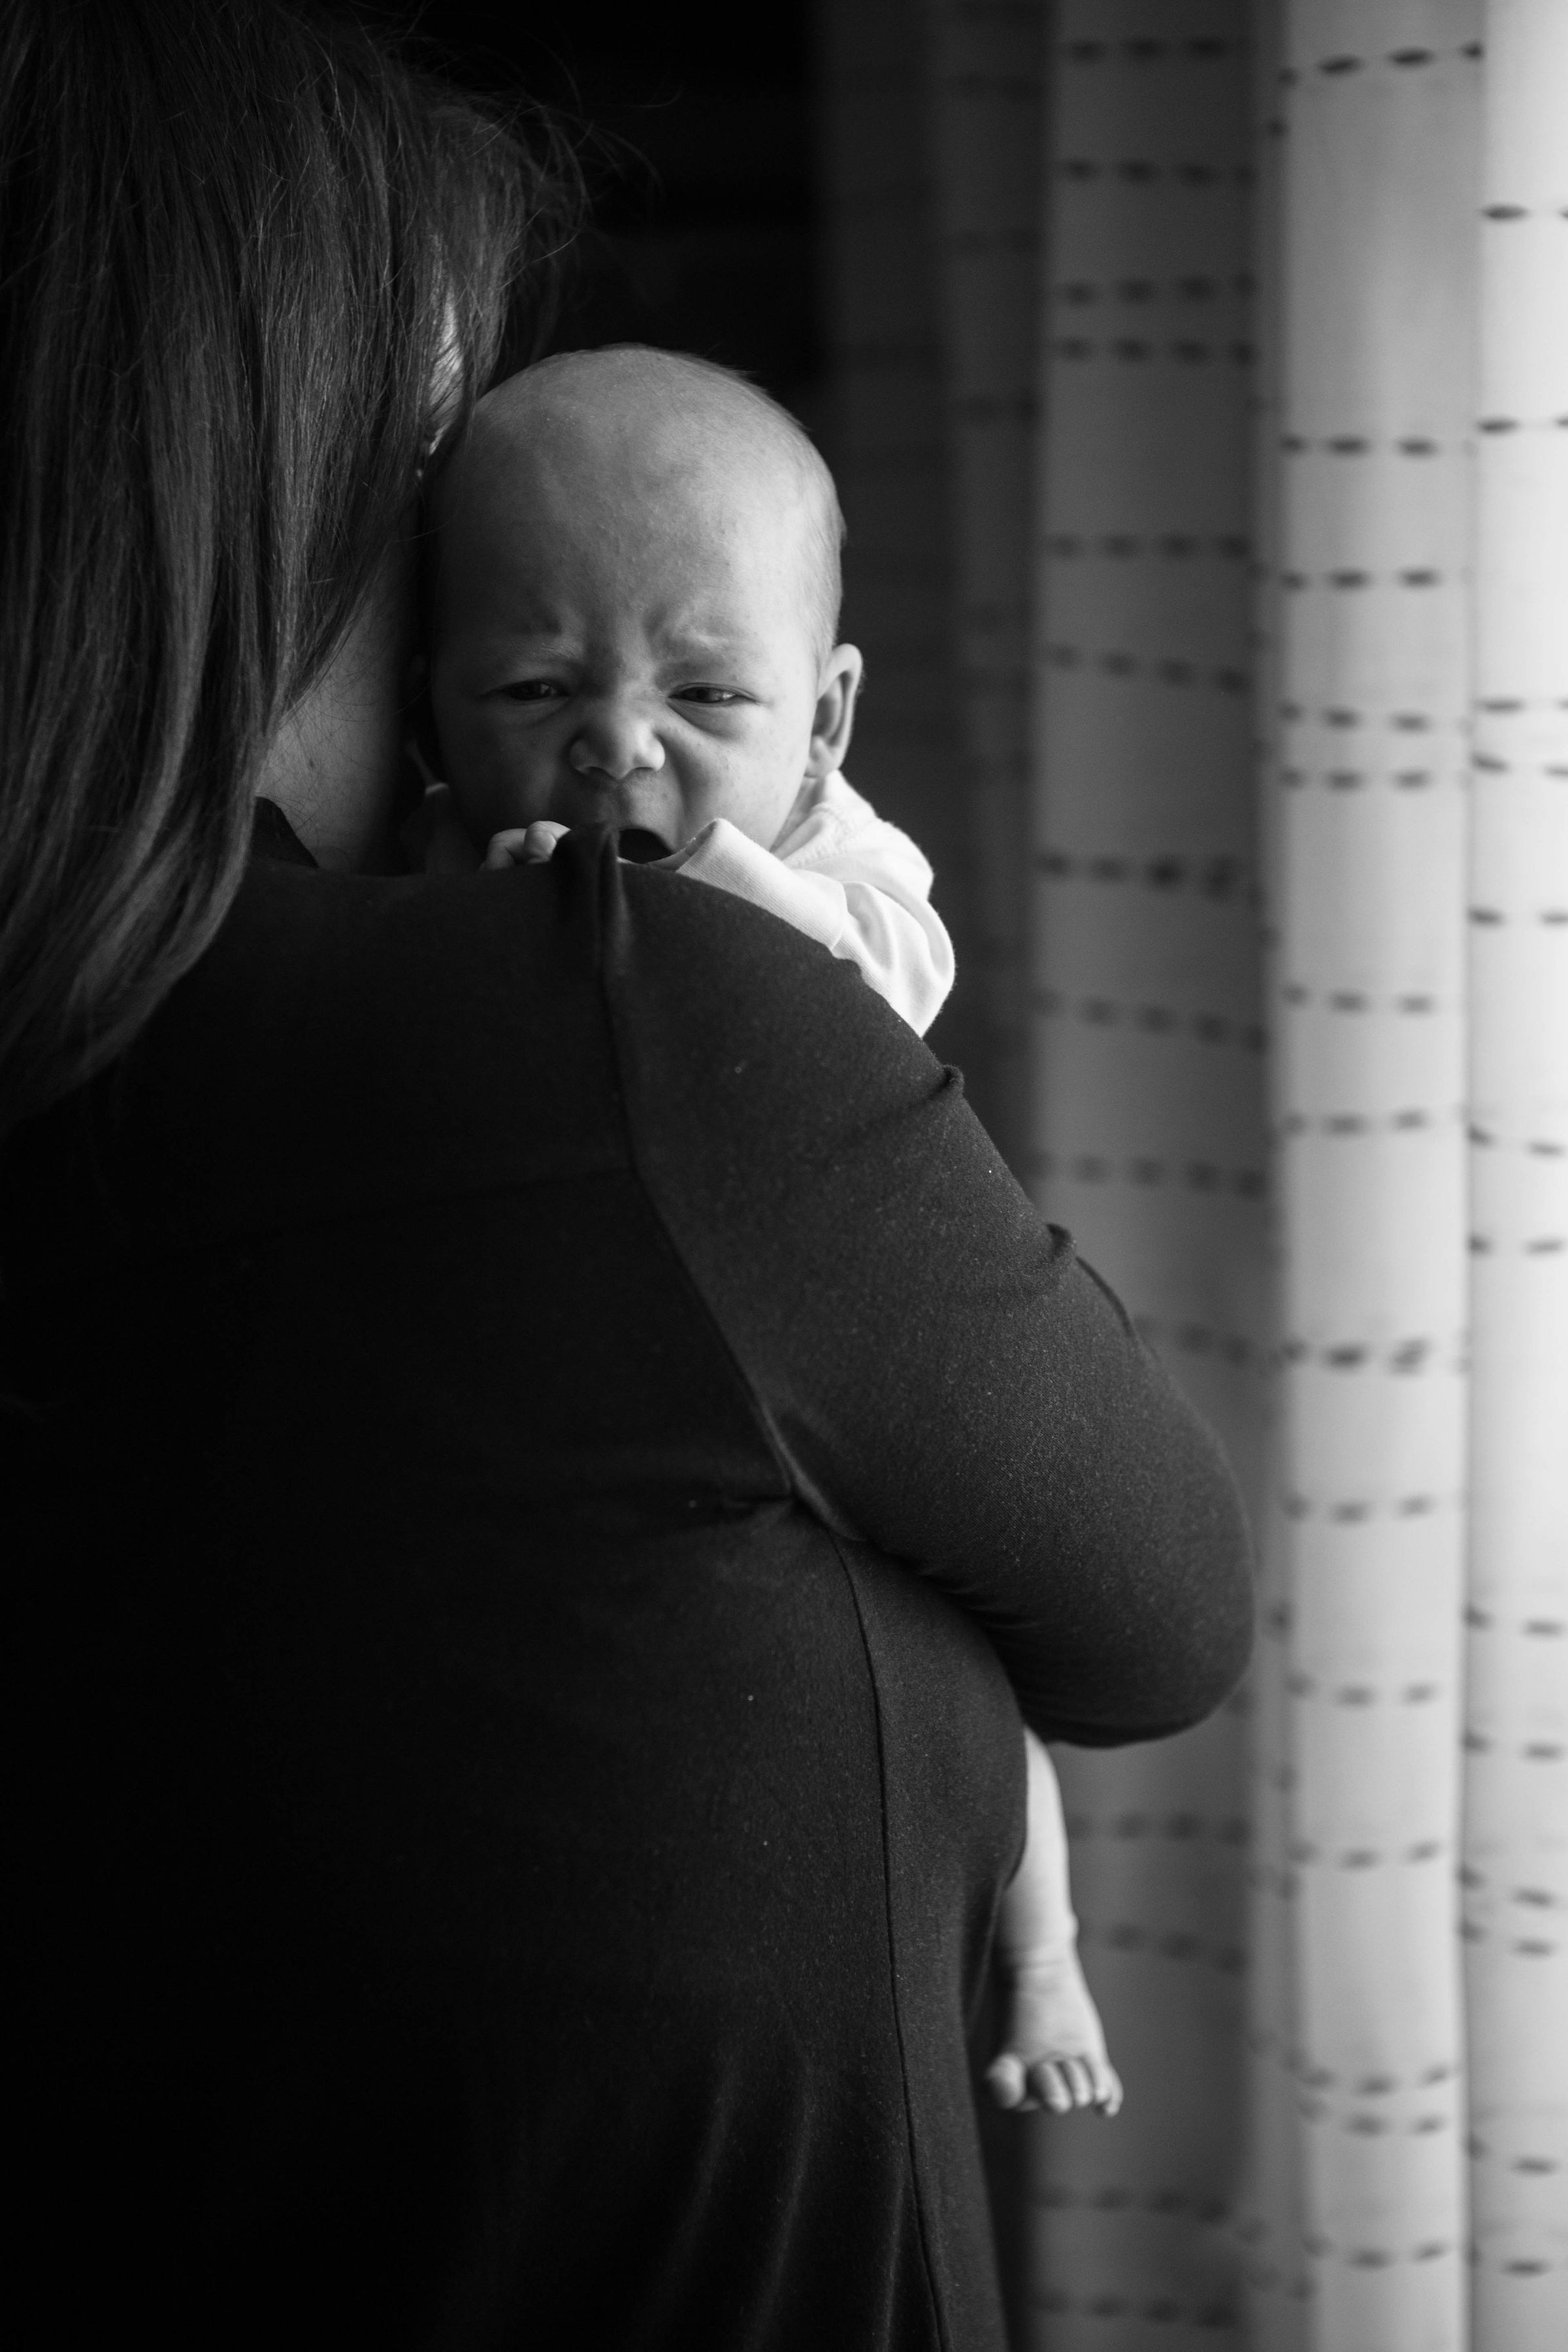 A closeup of a woman holding a crying baby | Source: Unsplash